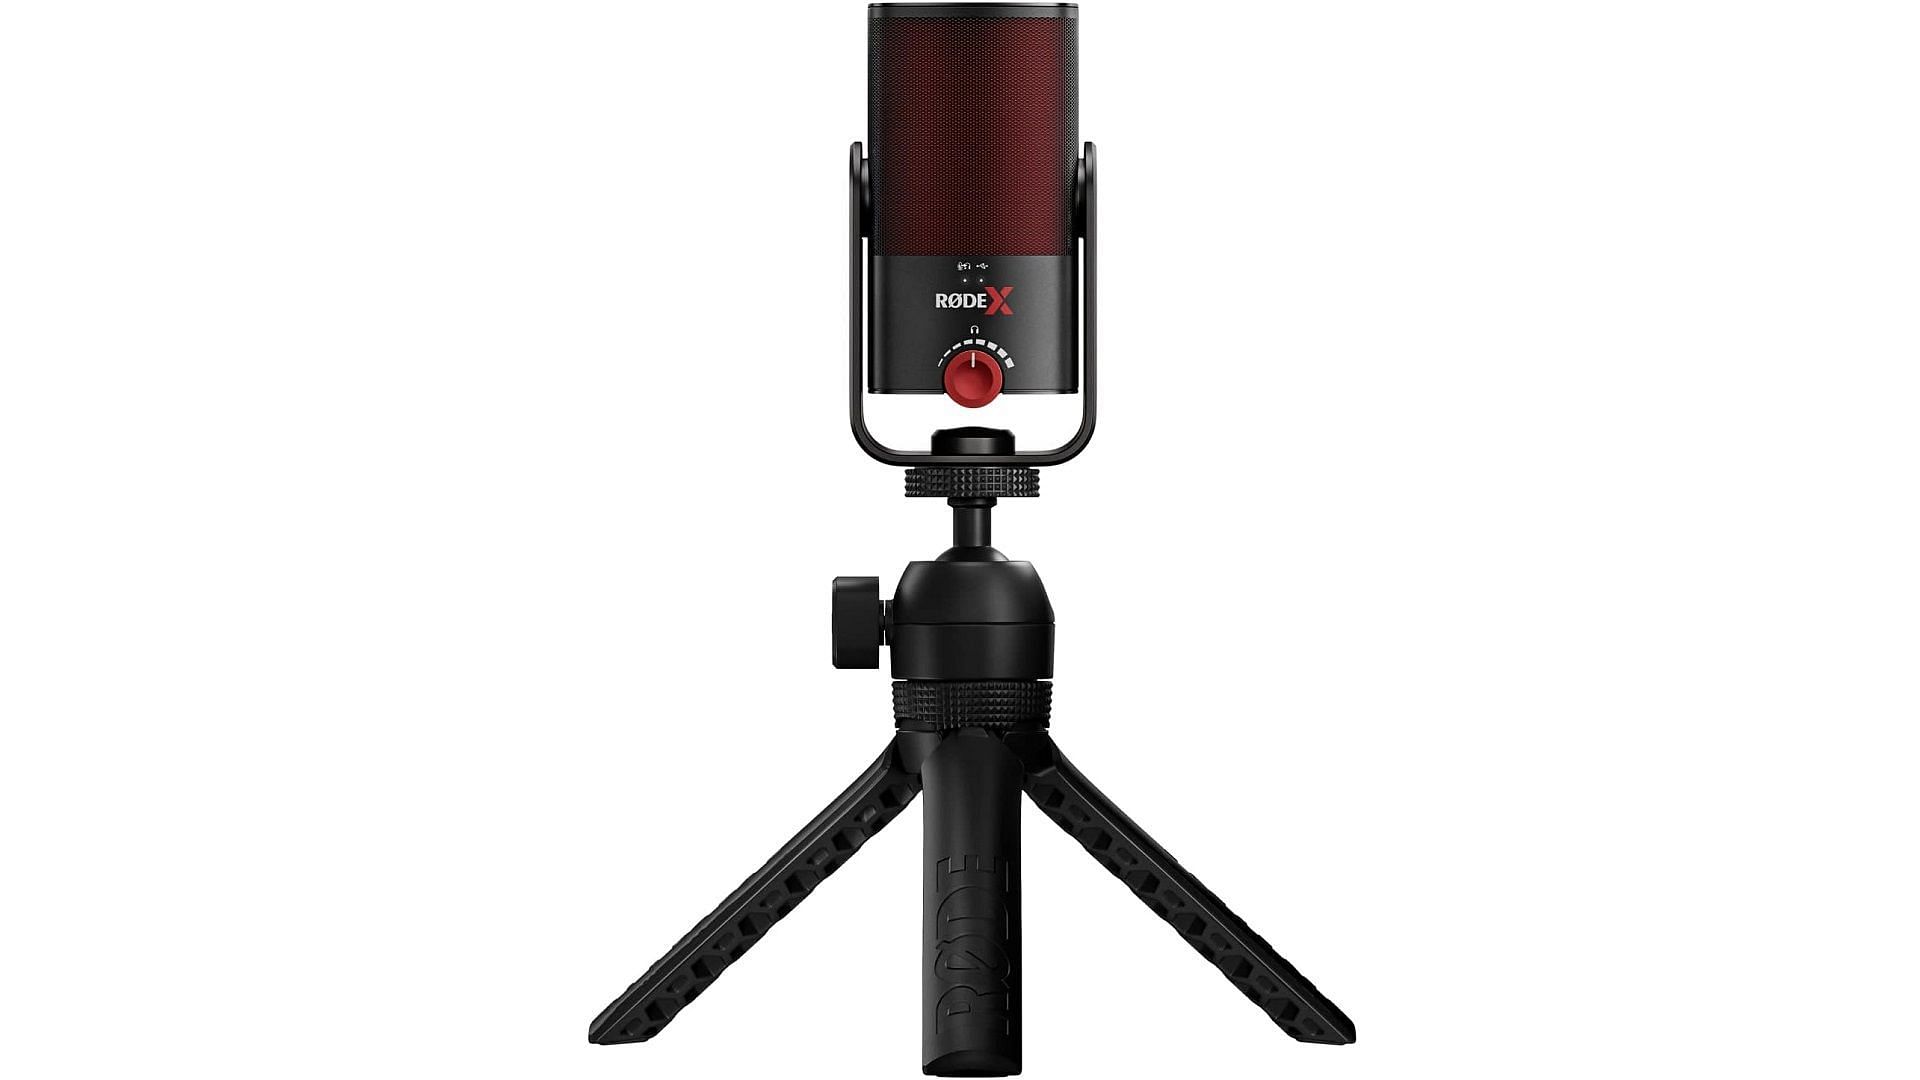 RODE X XCM-50 professional microphone with the tripod (Image via Amazon)